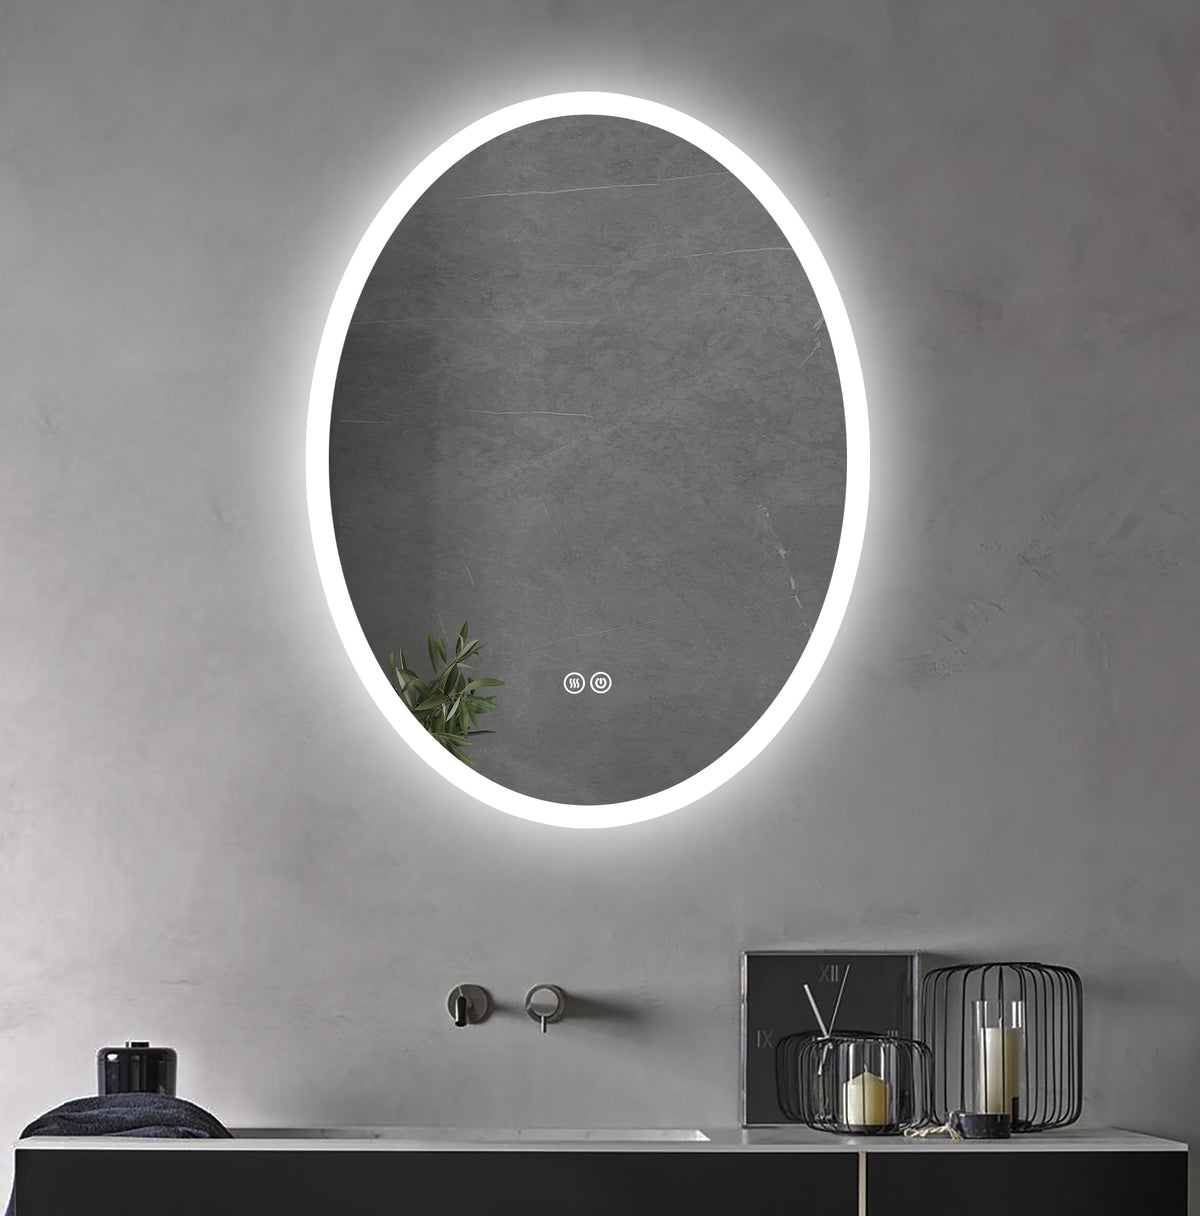 600x800mm Oval Frameless with Frosted Edge Backlit Led Mirror Bathroom Vanity Mirror